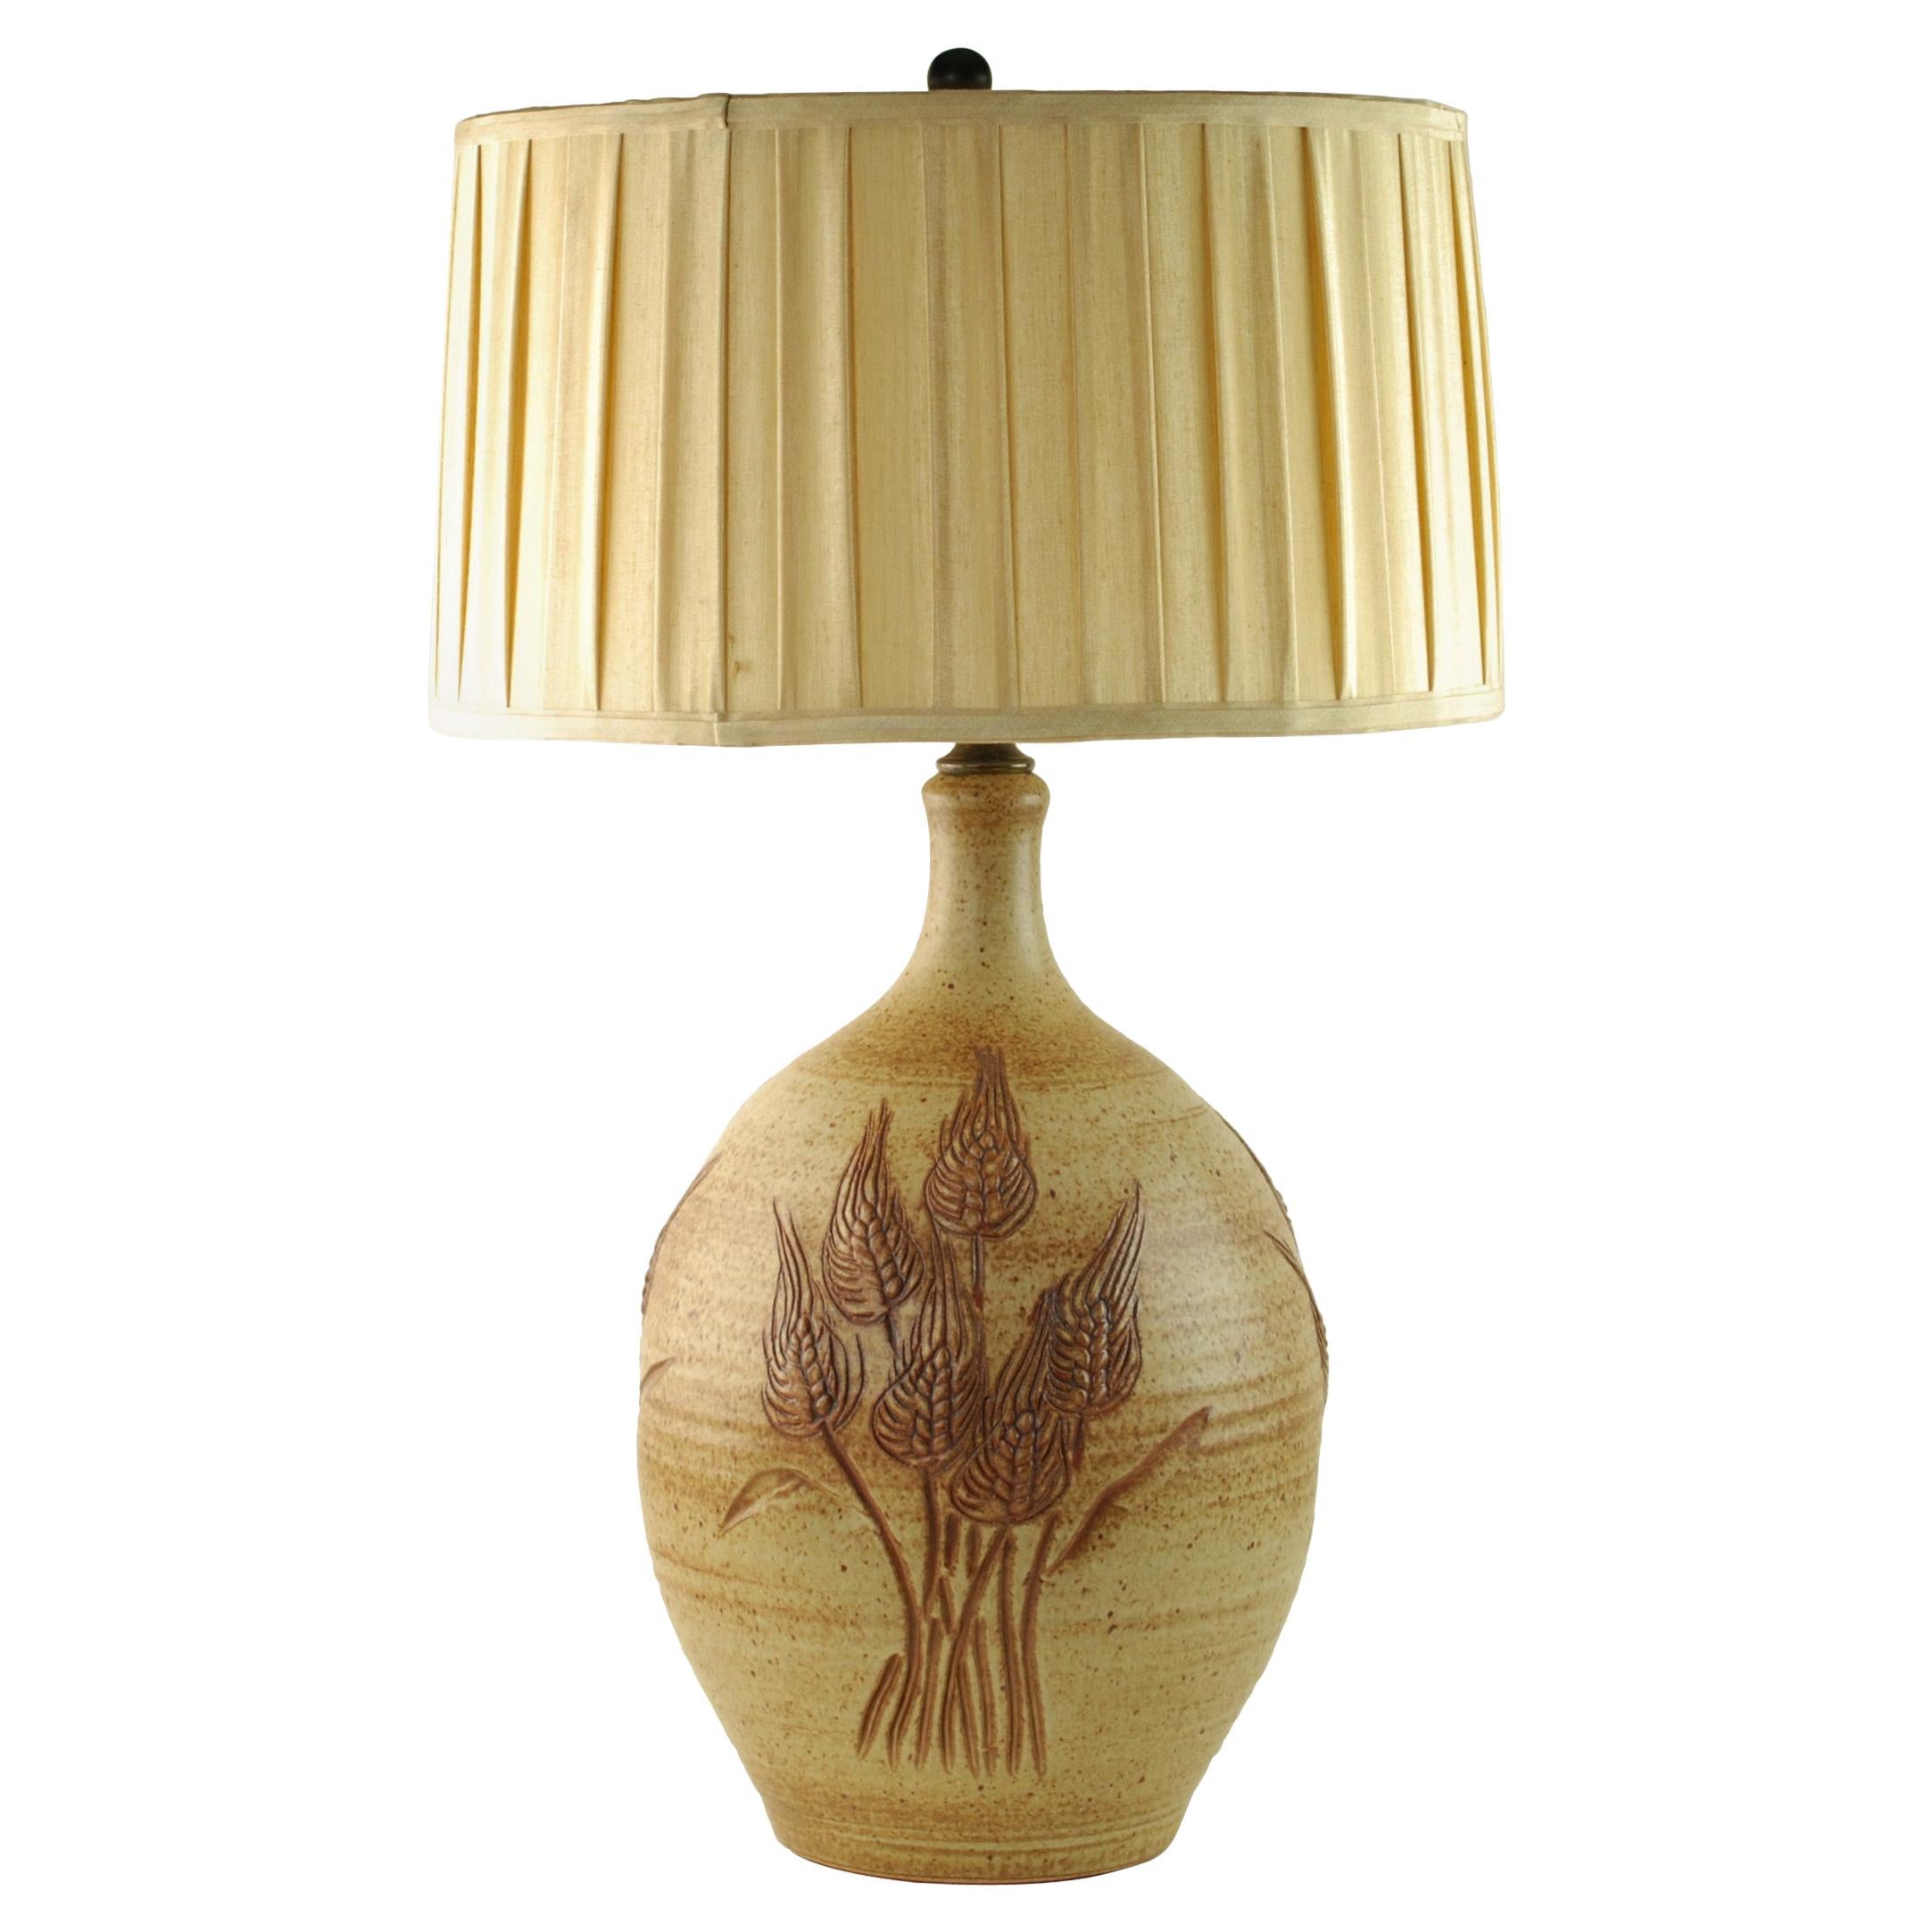 Wishon-Harrell Stoneware Table Lamp with Hand Carved Wheat Motif For Sale